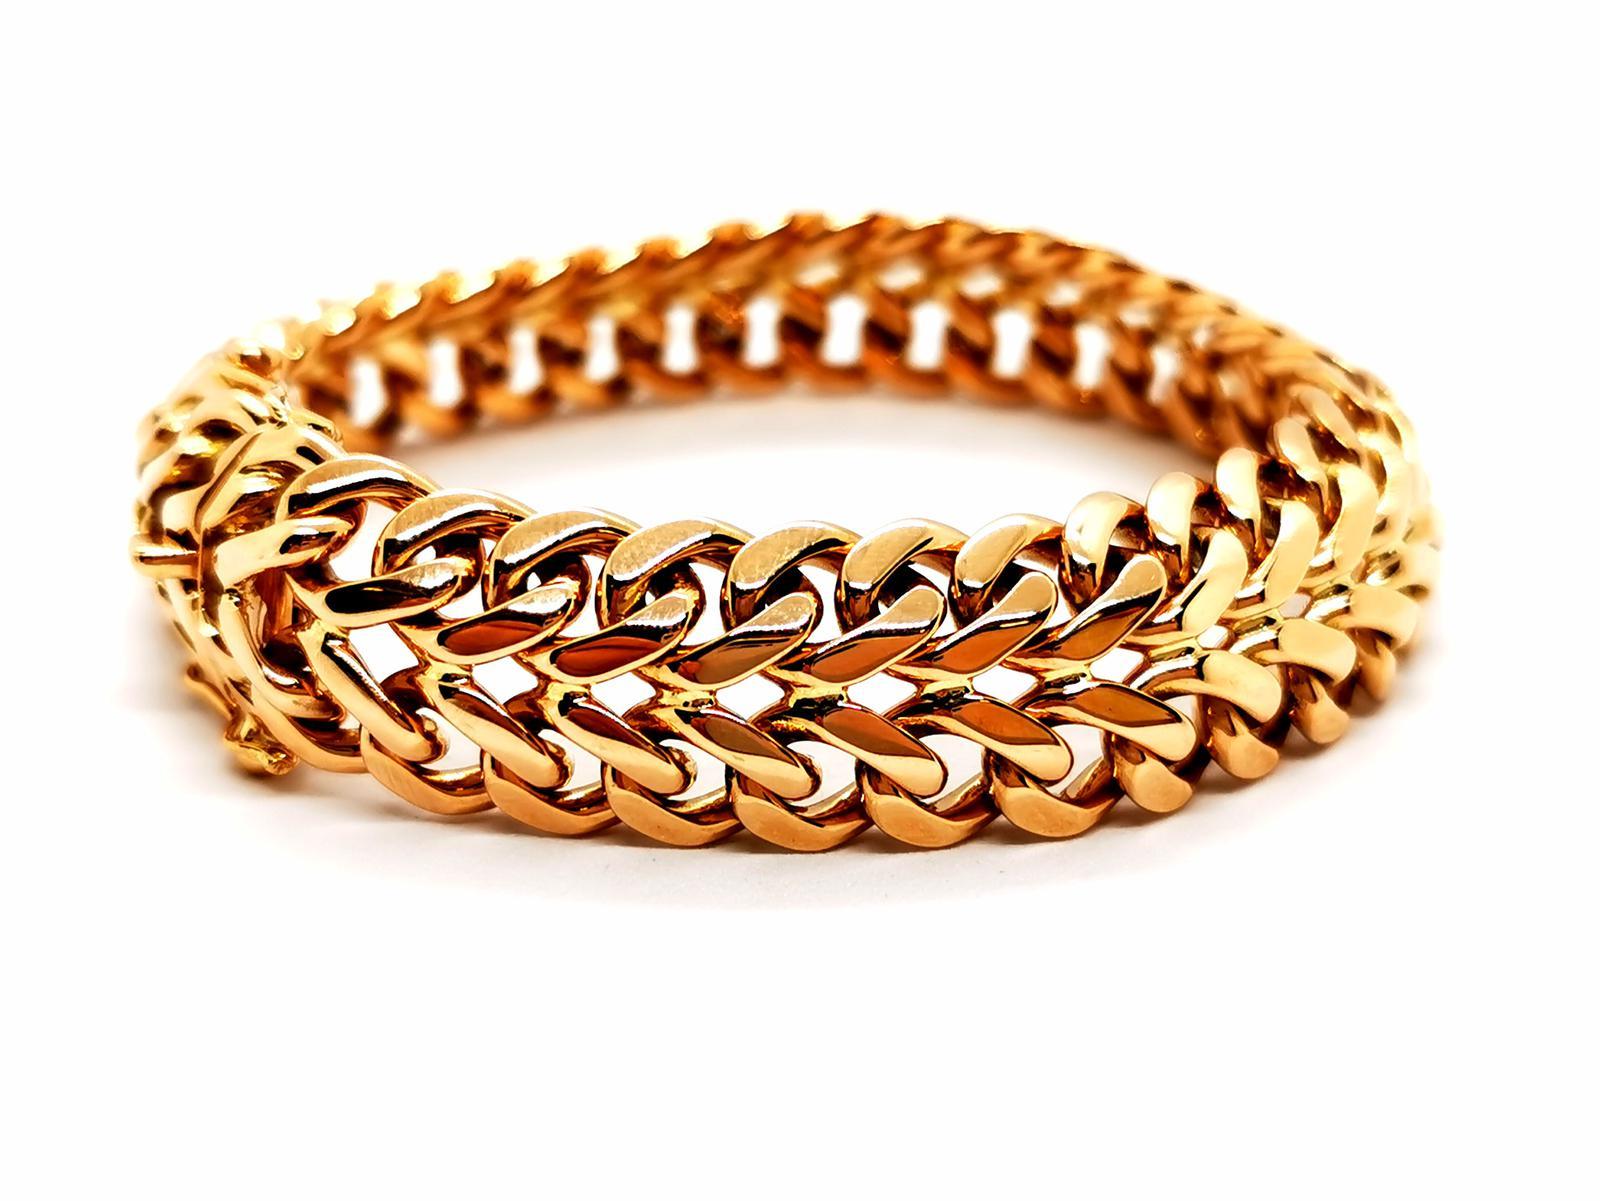 Yellow gold bracelet 750 mils (18 carats). flexible mesh bracelet. consisting of a succession of round links interleaved. length: 20 cm. width: 1.36 cm. thickness: 0.52 cm. total weight: 69.39 g. clasp tab with two safety eight. eagle head punch.